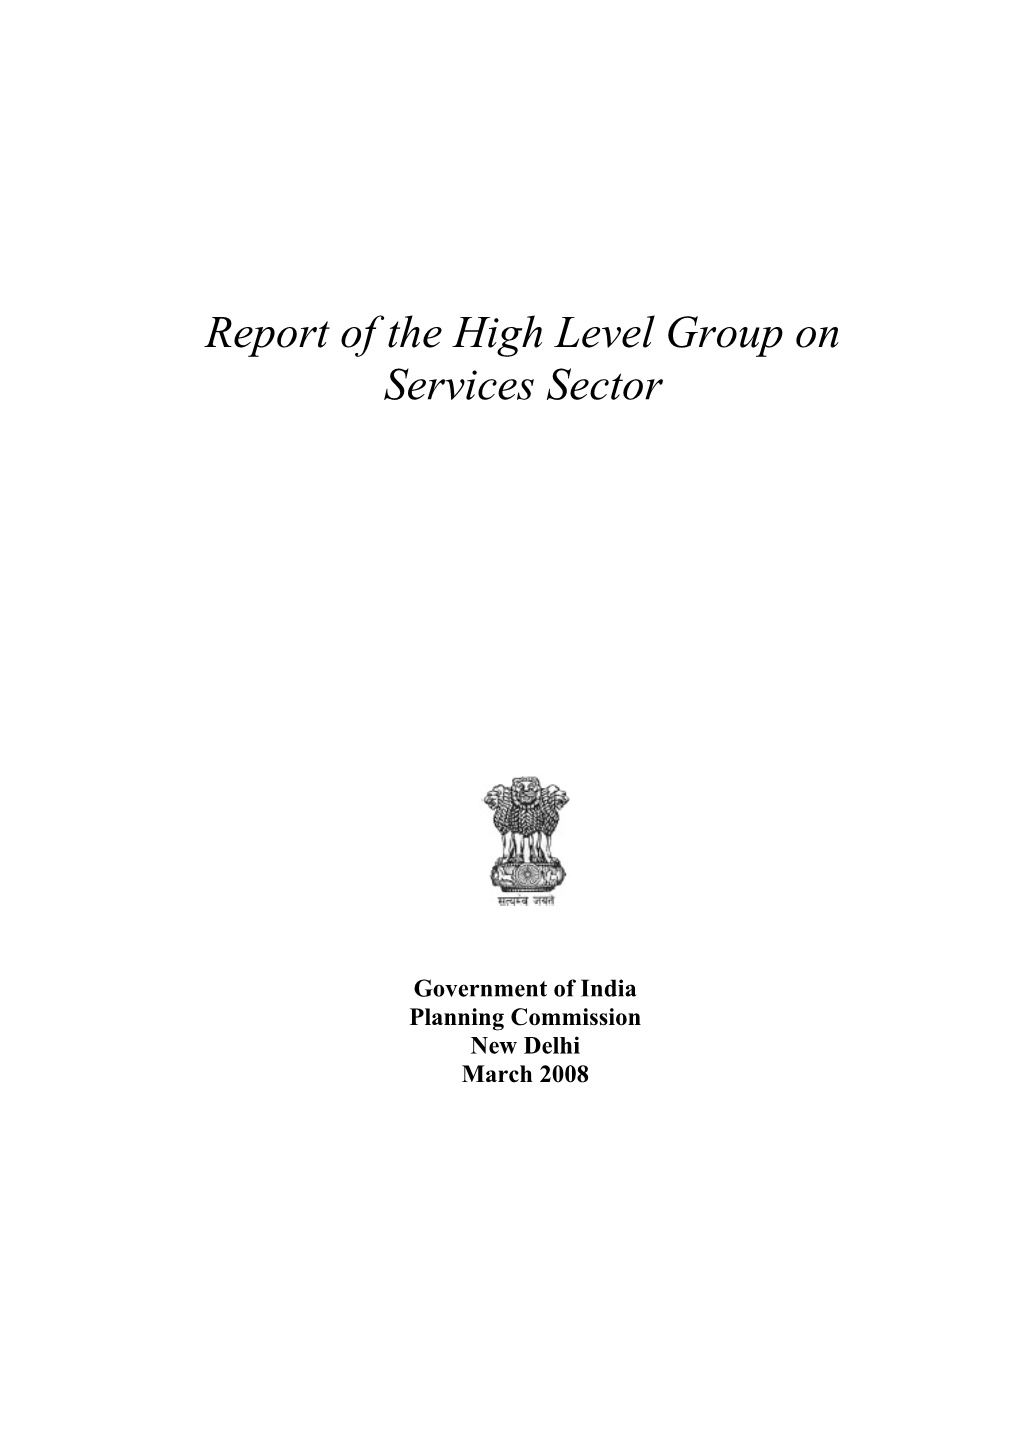 Draft Report of the High Level Group on Services Sector